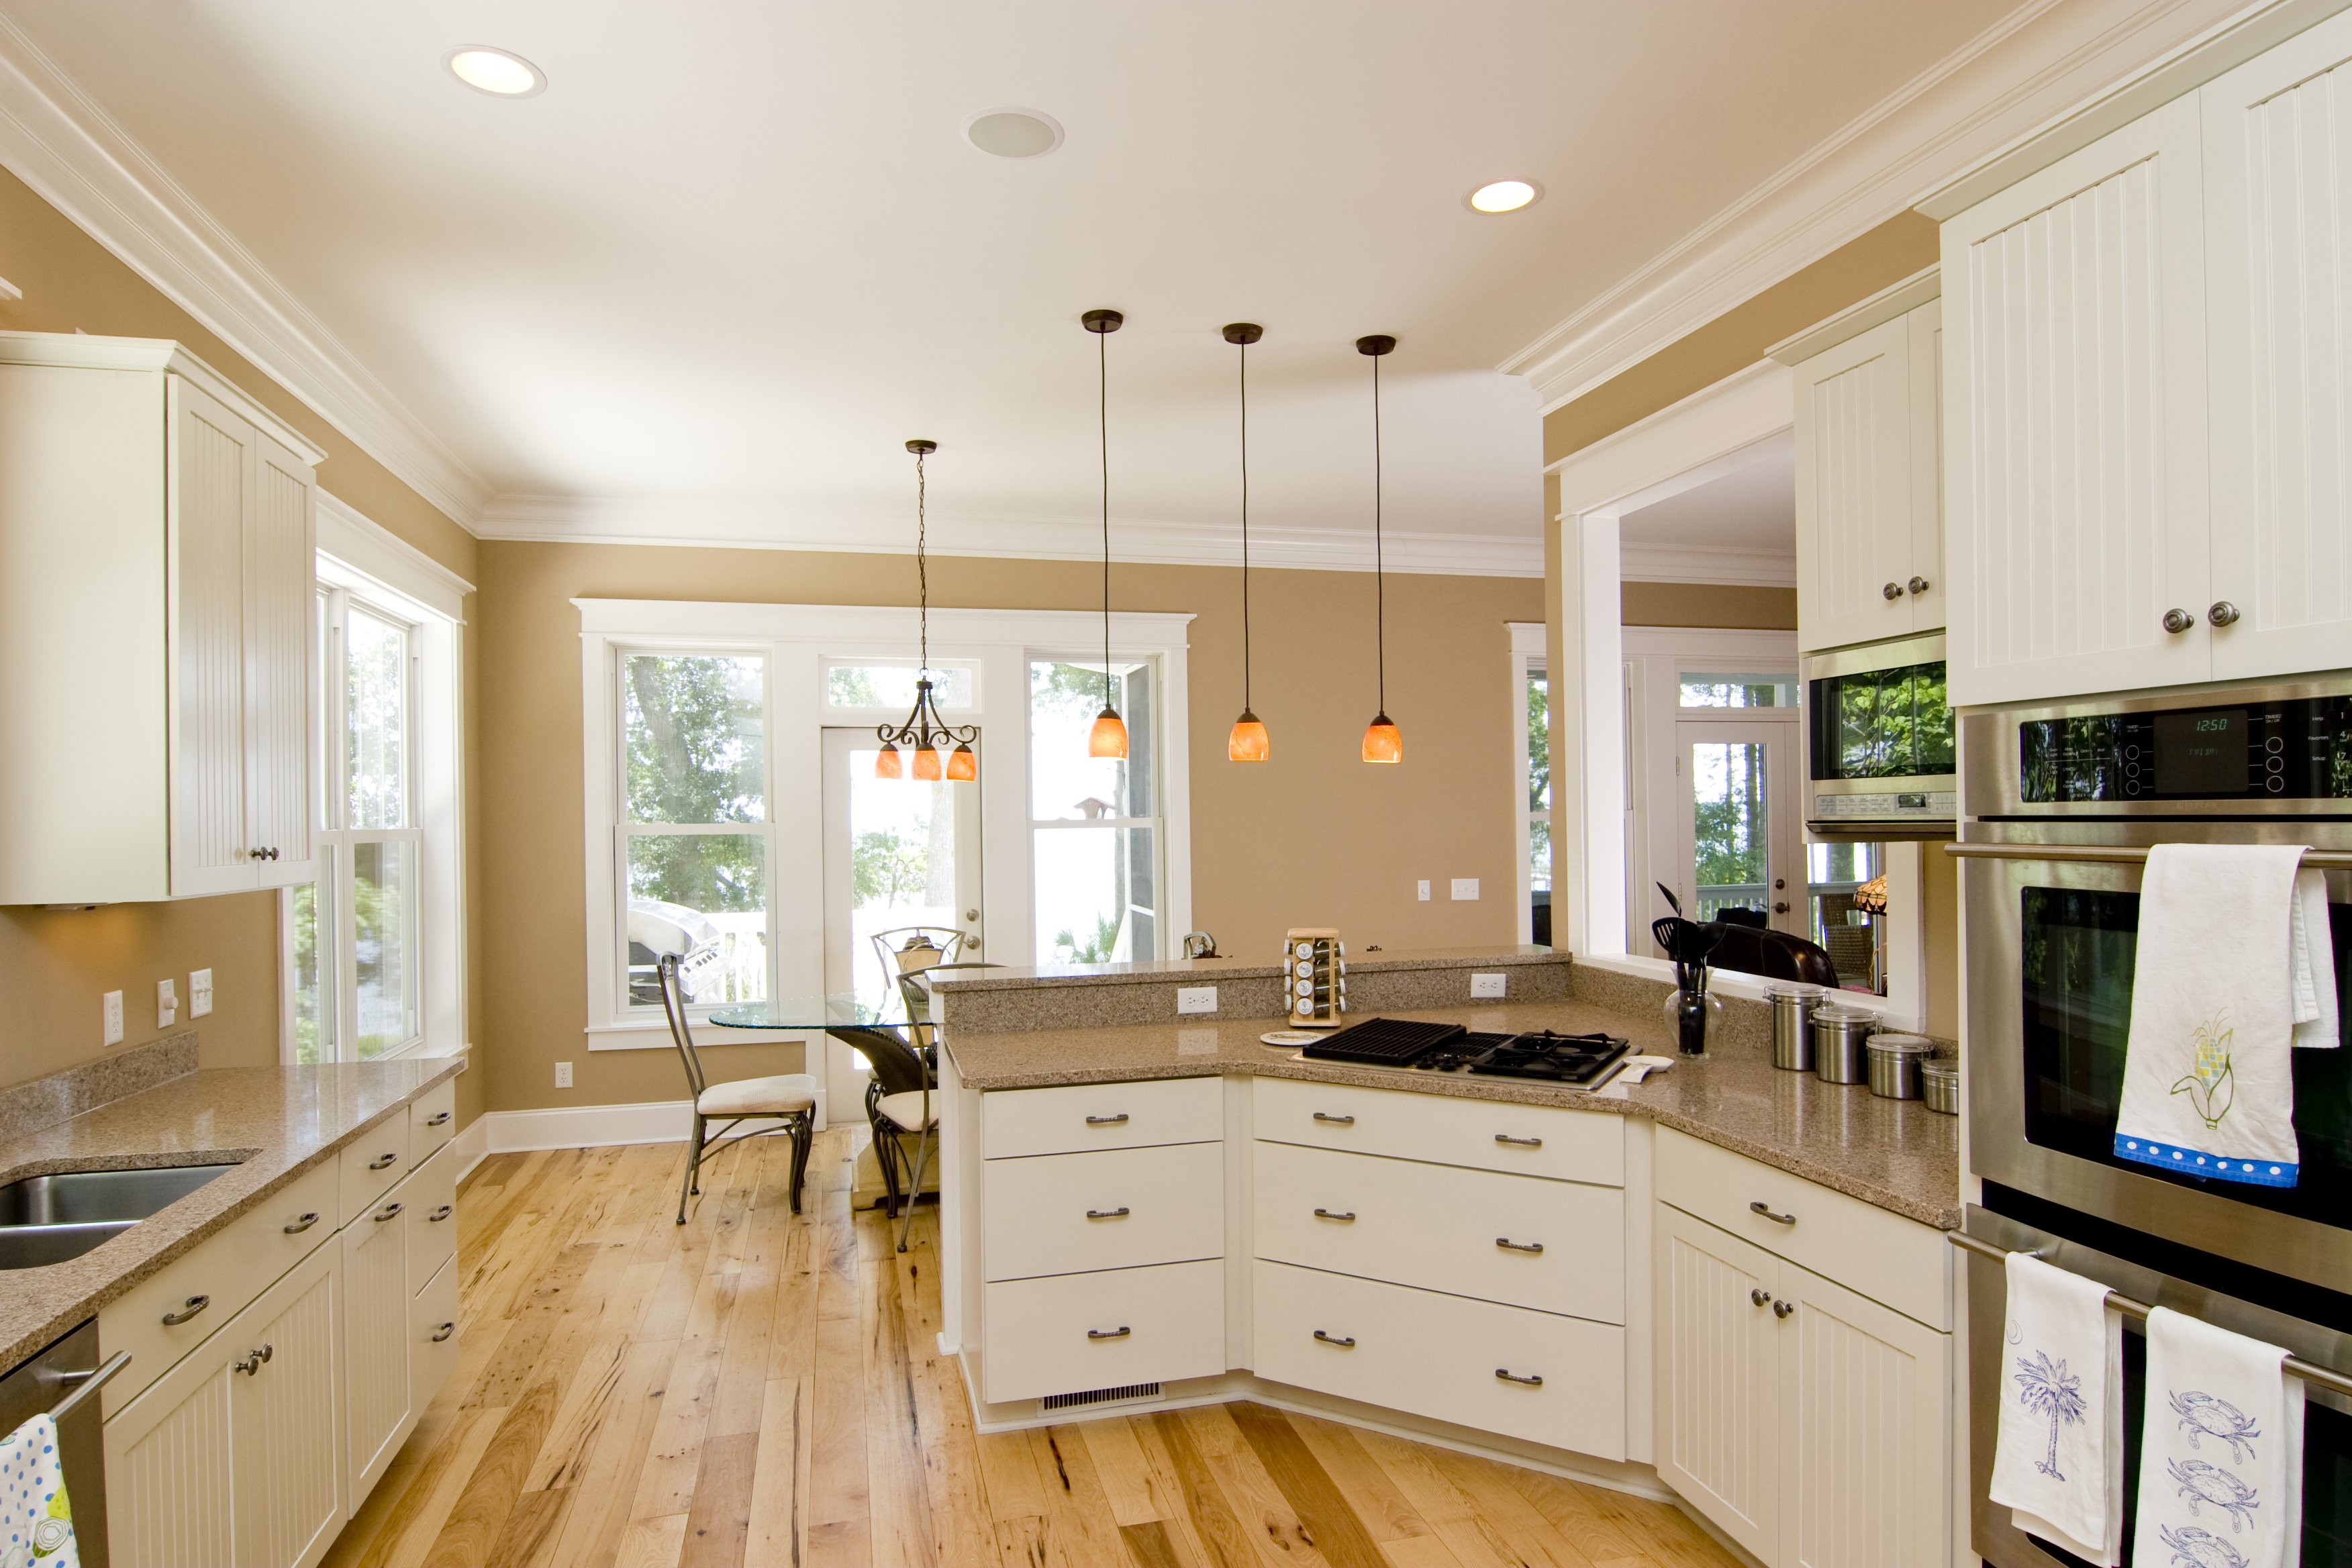 Knowing About Different Kitchen Layouts and Choosing the Best One